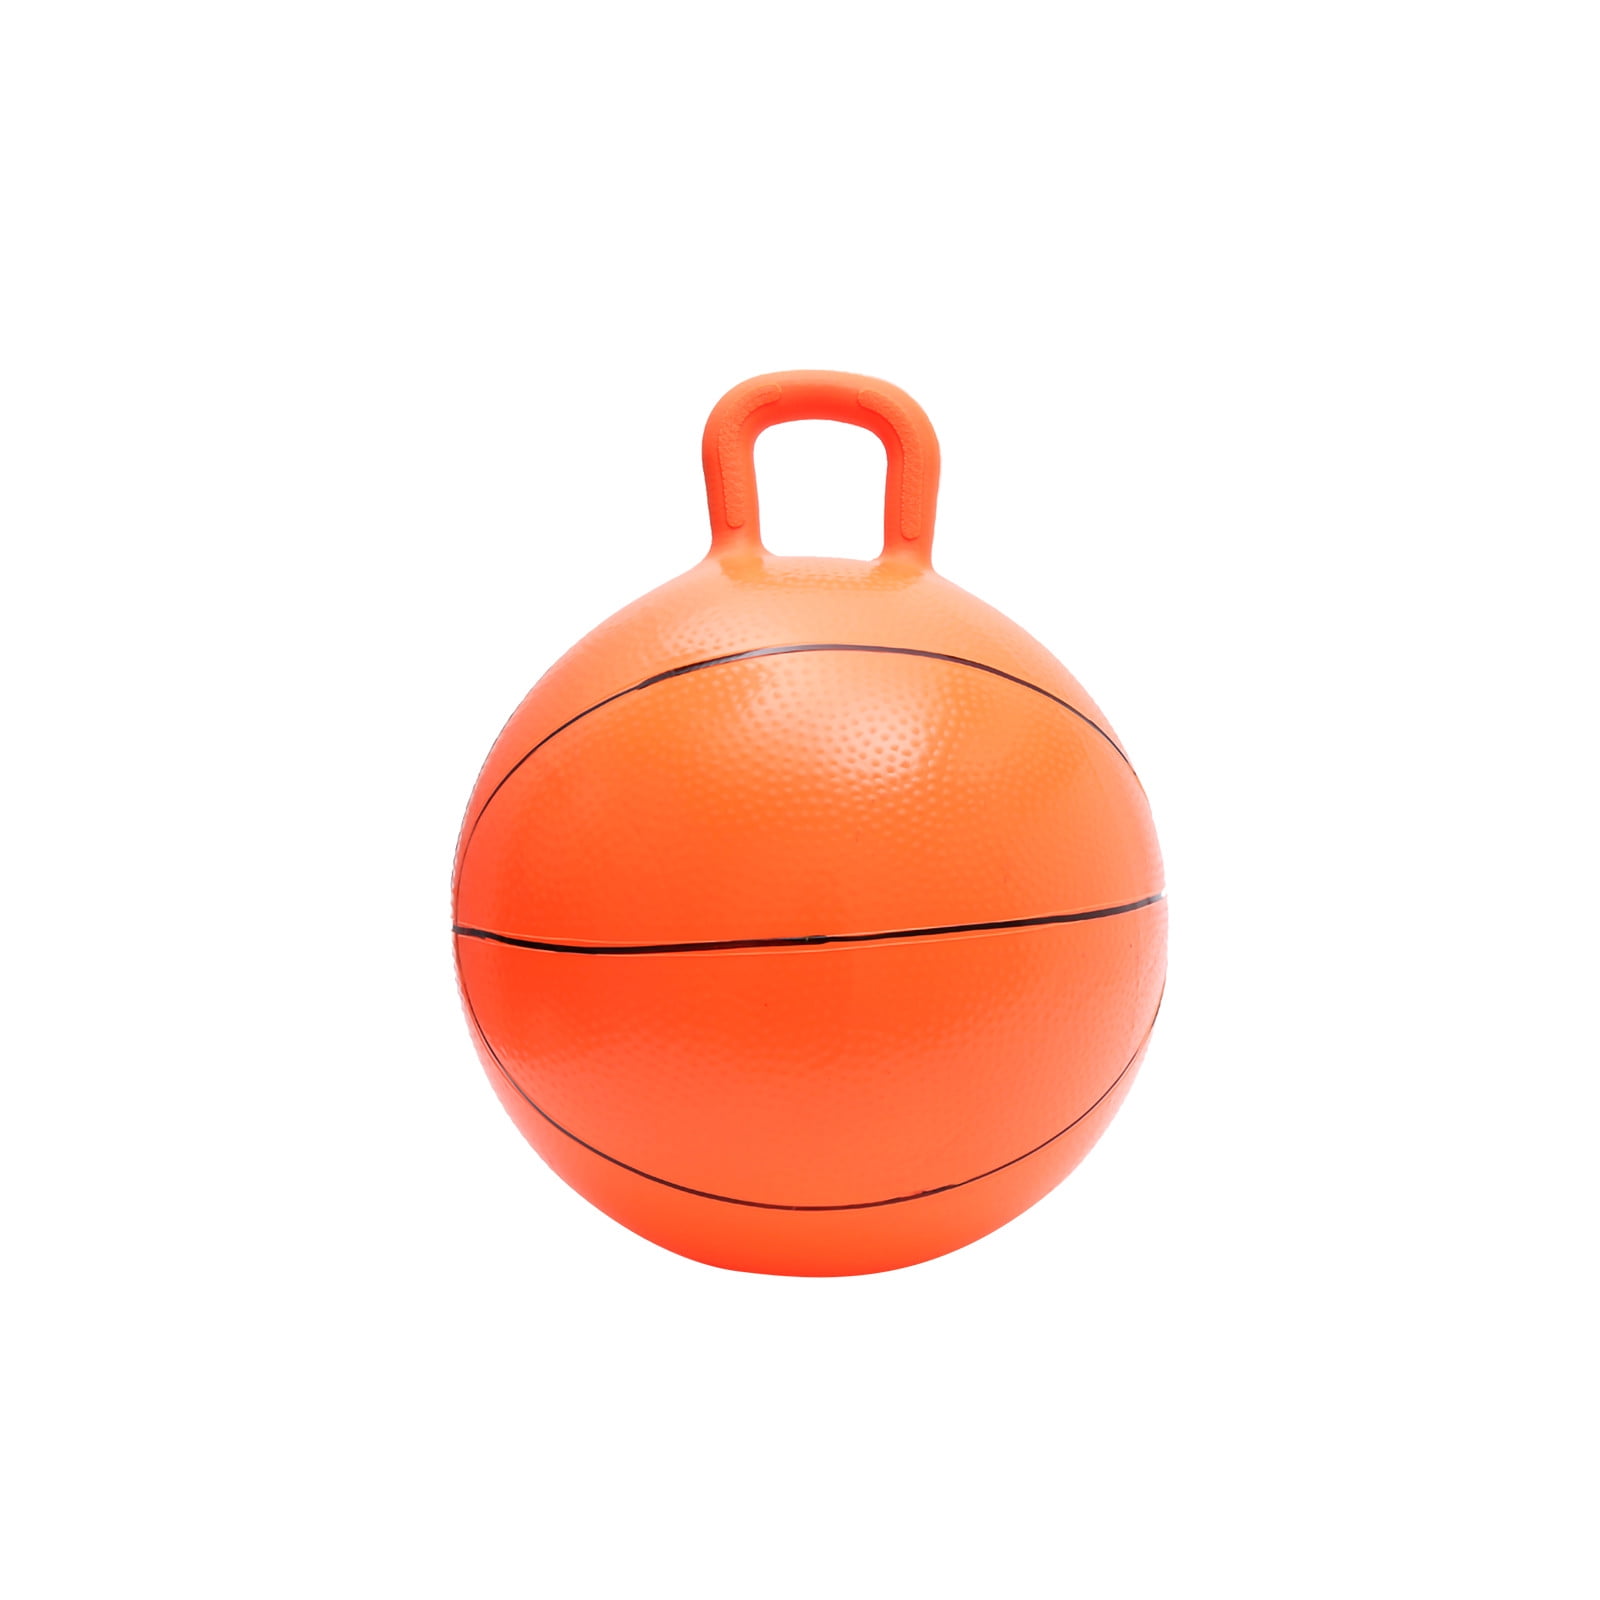 LARGE EXERCISE RETRO SPACE HOPPER PLAY BALL TOY KIDS ADULT GAME GARDEN SUMMER 